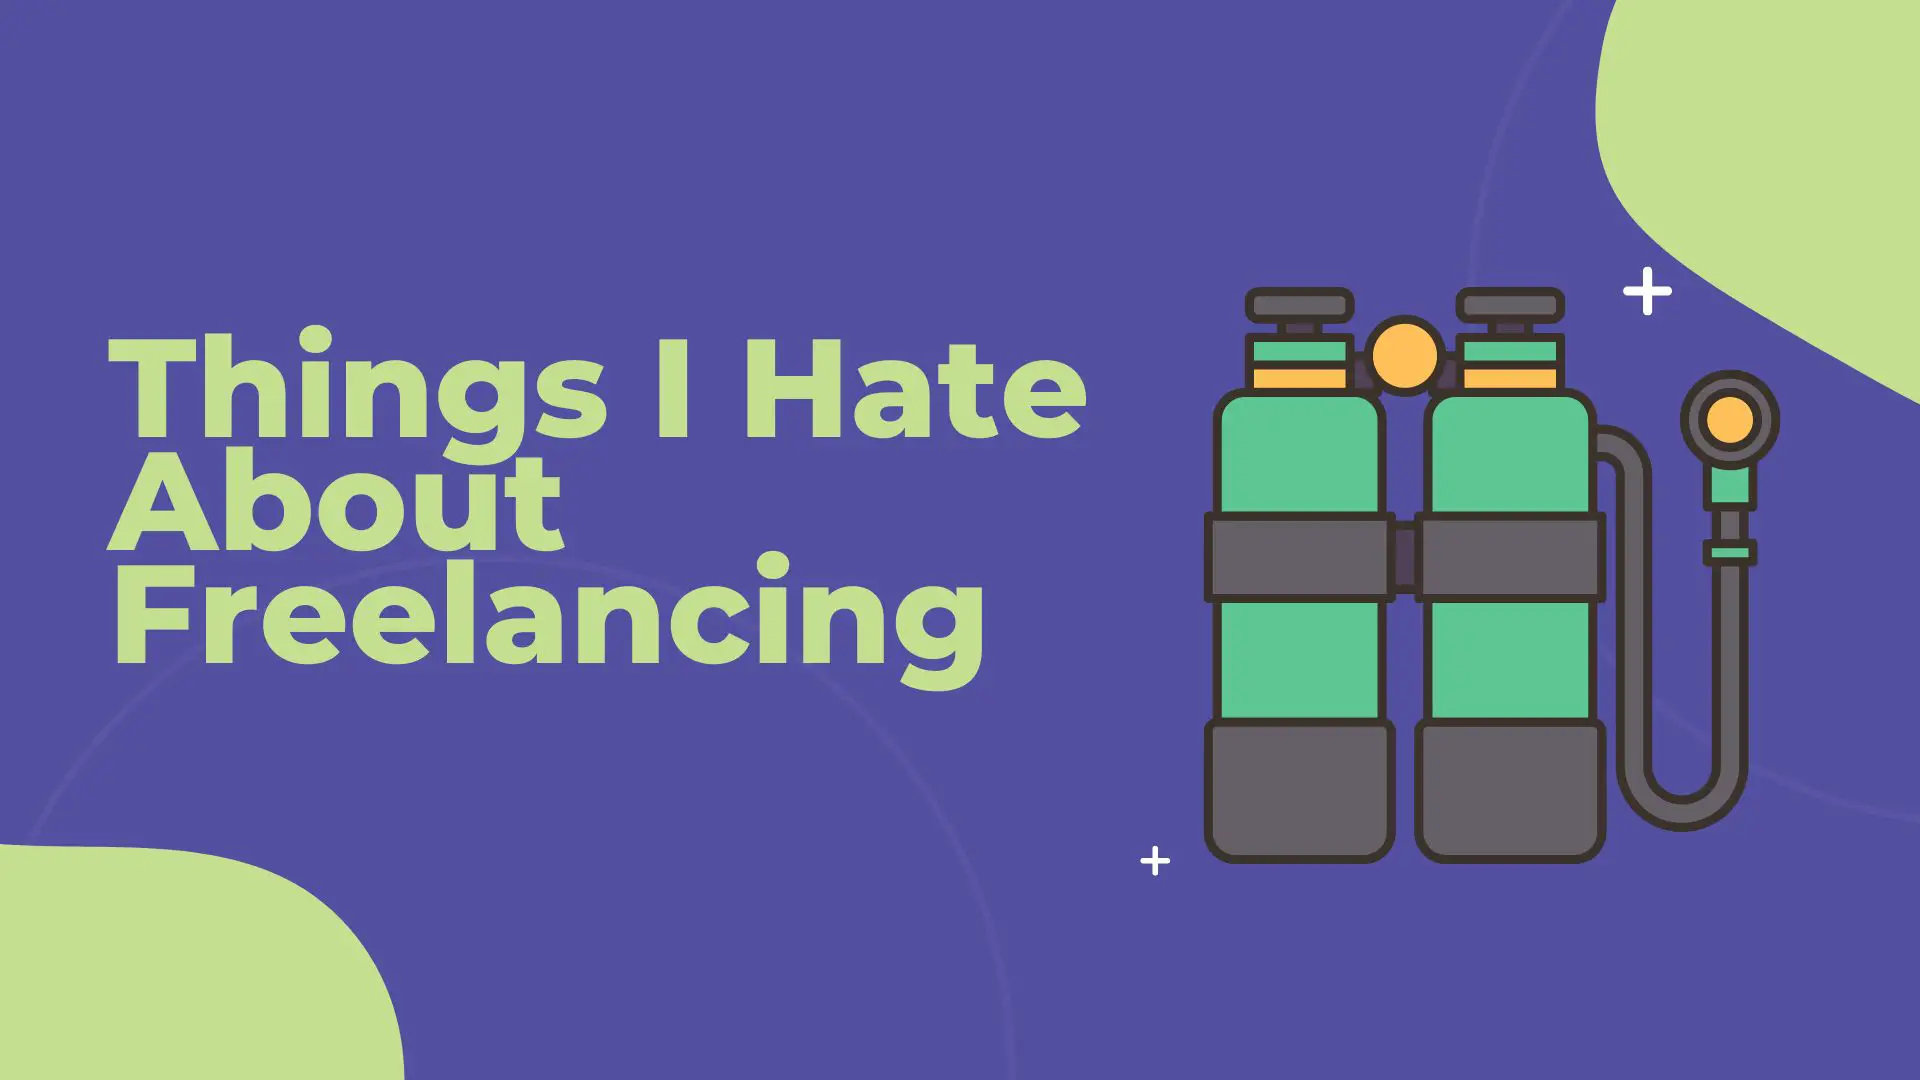 Things I Hate About Freelancing